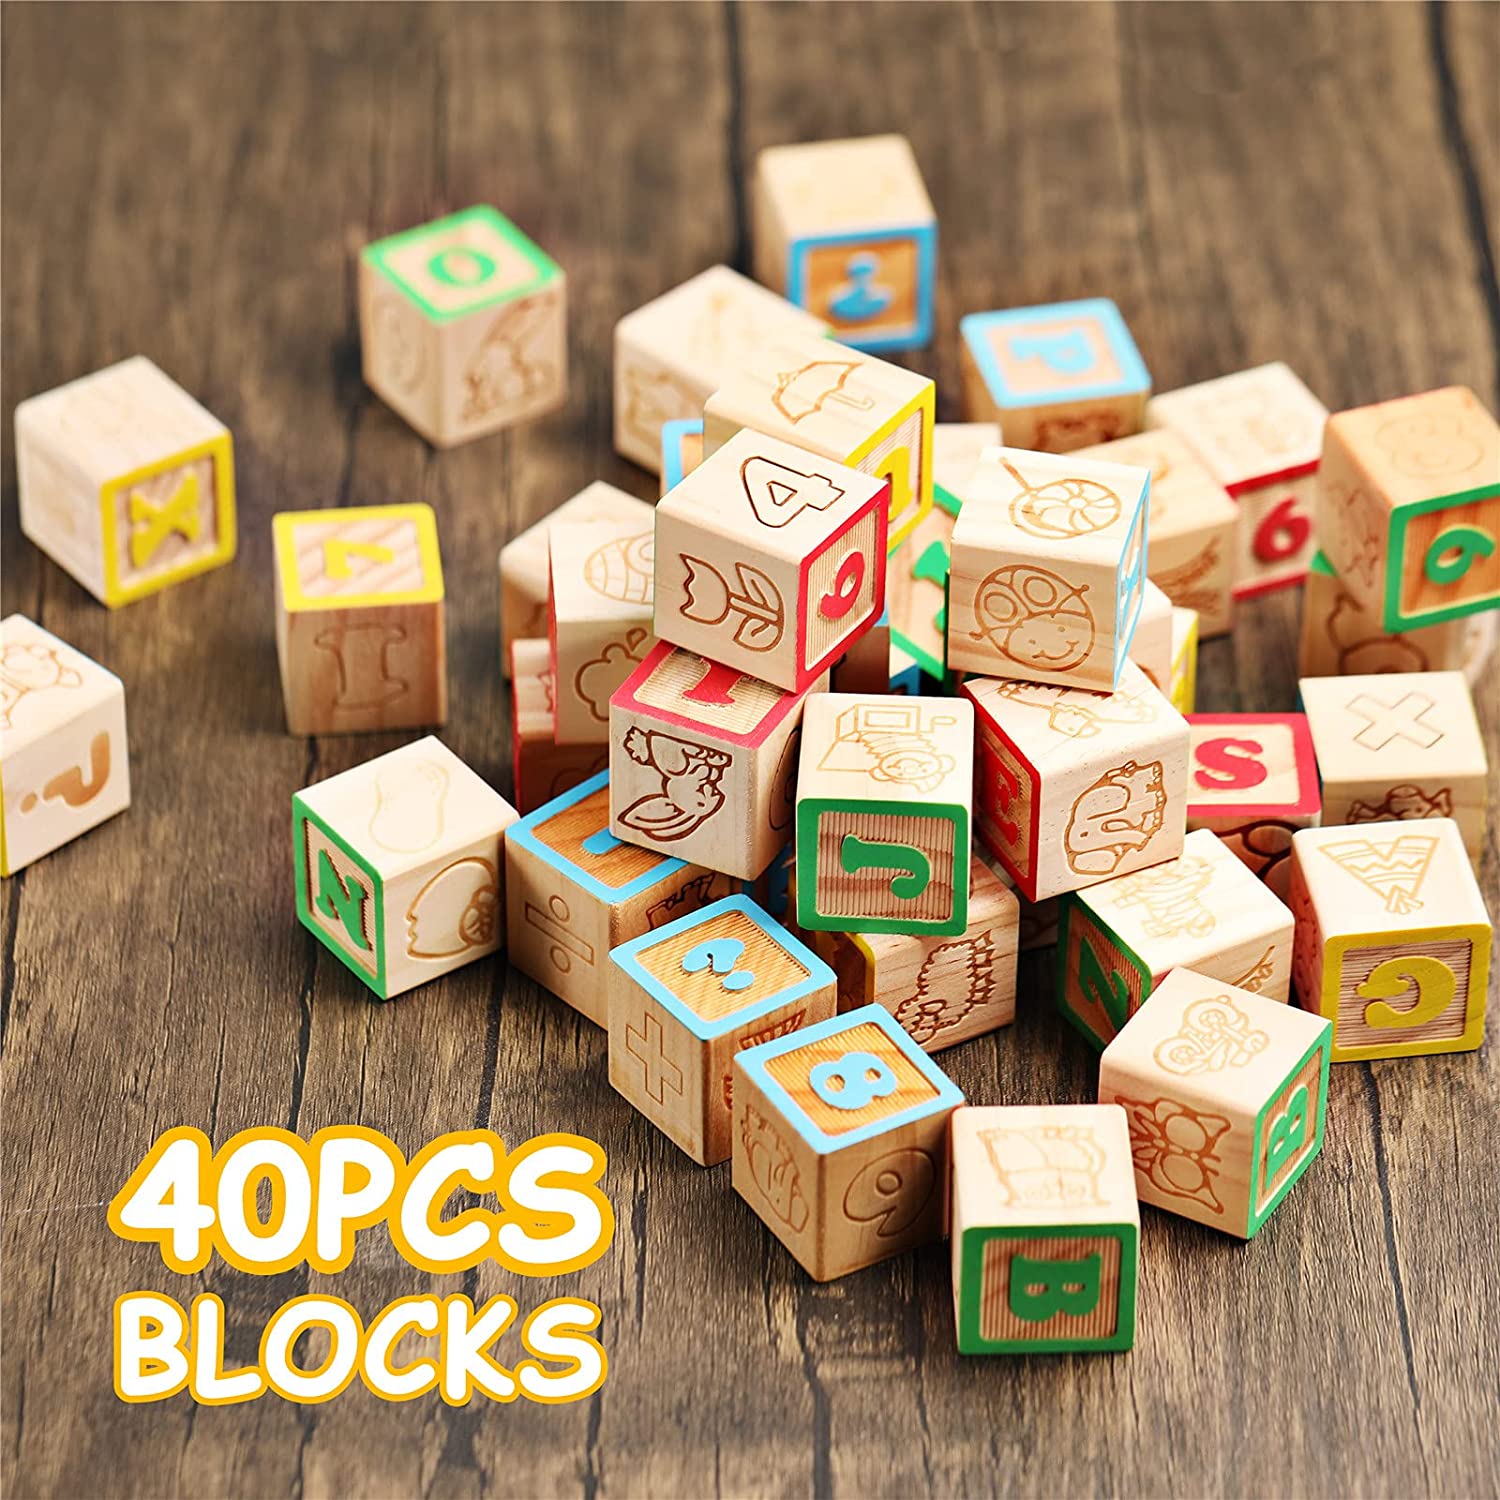 SainSmart Jr. Wooden ABC Alphabet Blocks Set, 40PCS Classic Wood Toy for Stacking Building Educational Learning, with Mesh Bag for Preschool Letters Number Counting for Ages 3 4 5 6 Toddlers,1.2" - image 2 of 7